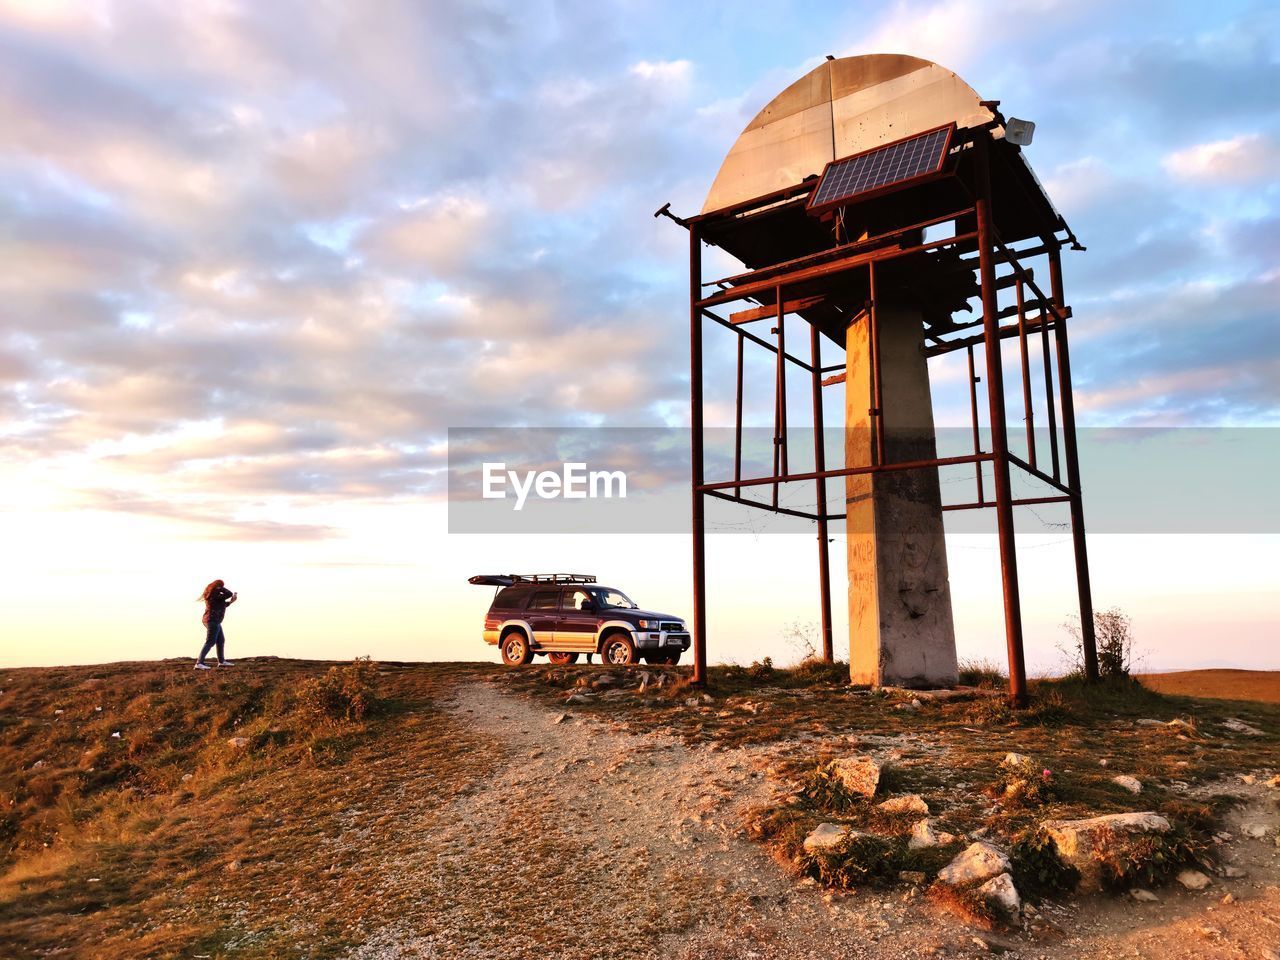 Traditional water tower at the pass in the caucasus mountains against the sky during sunset